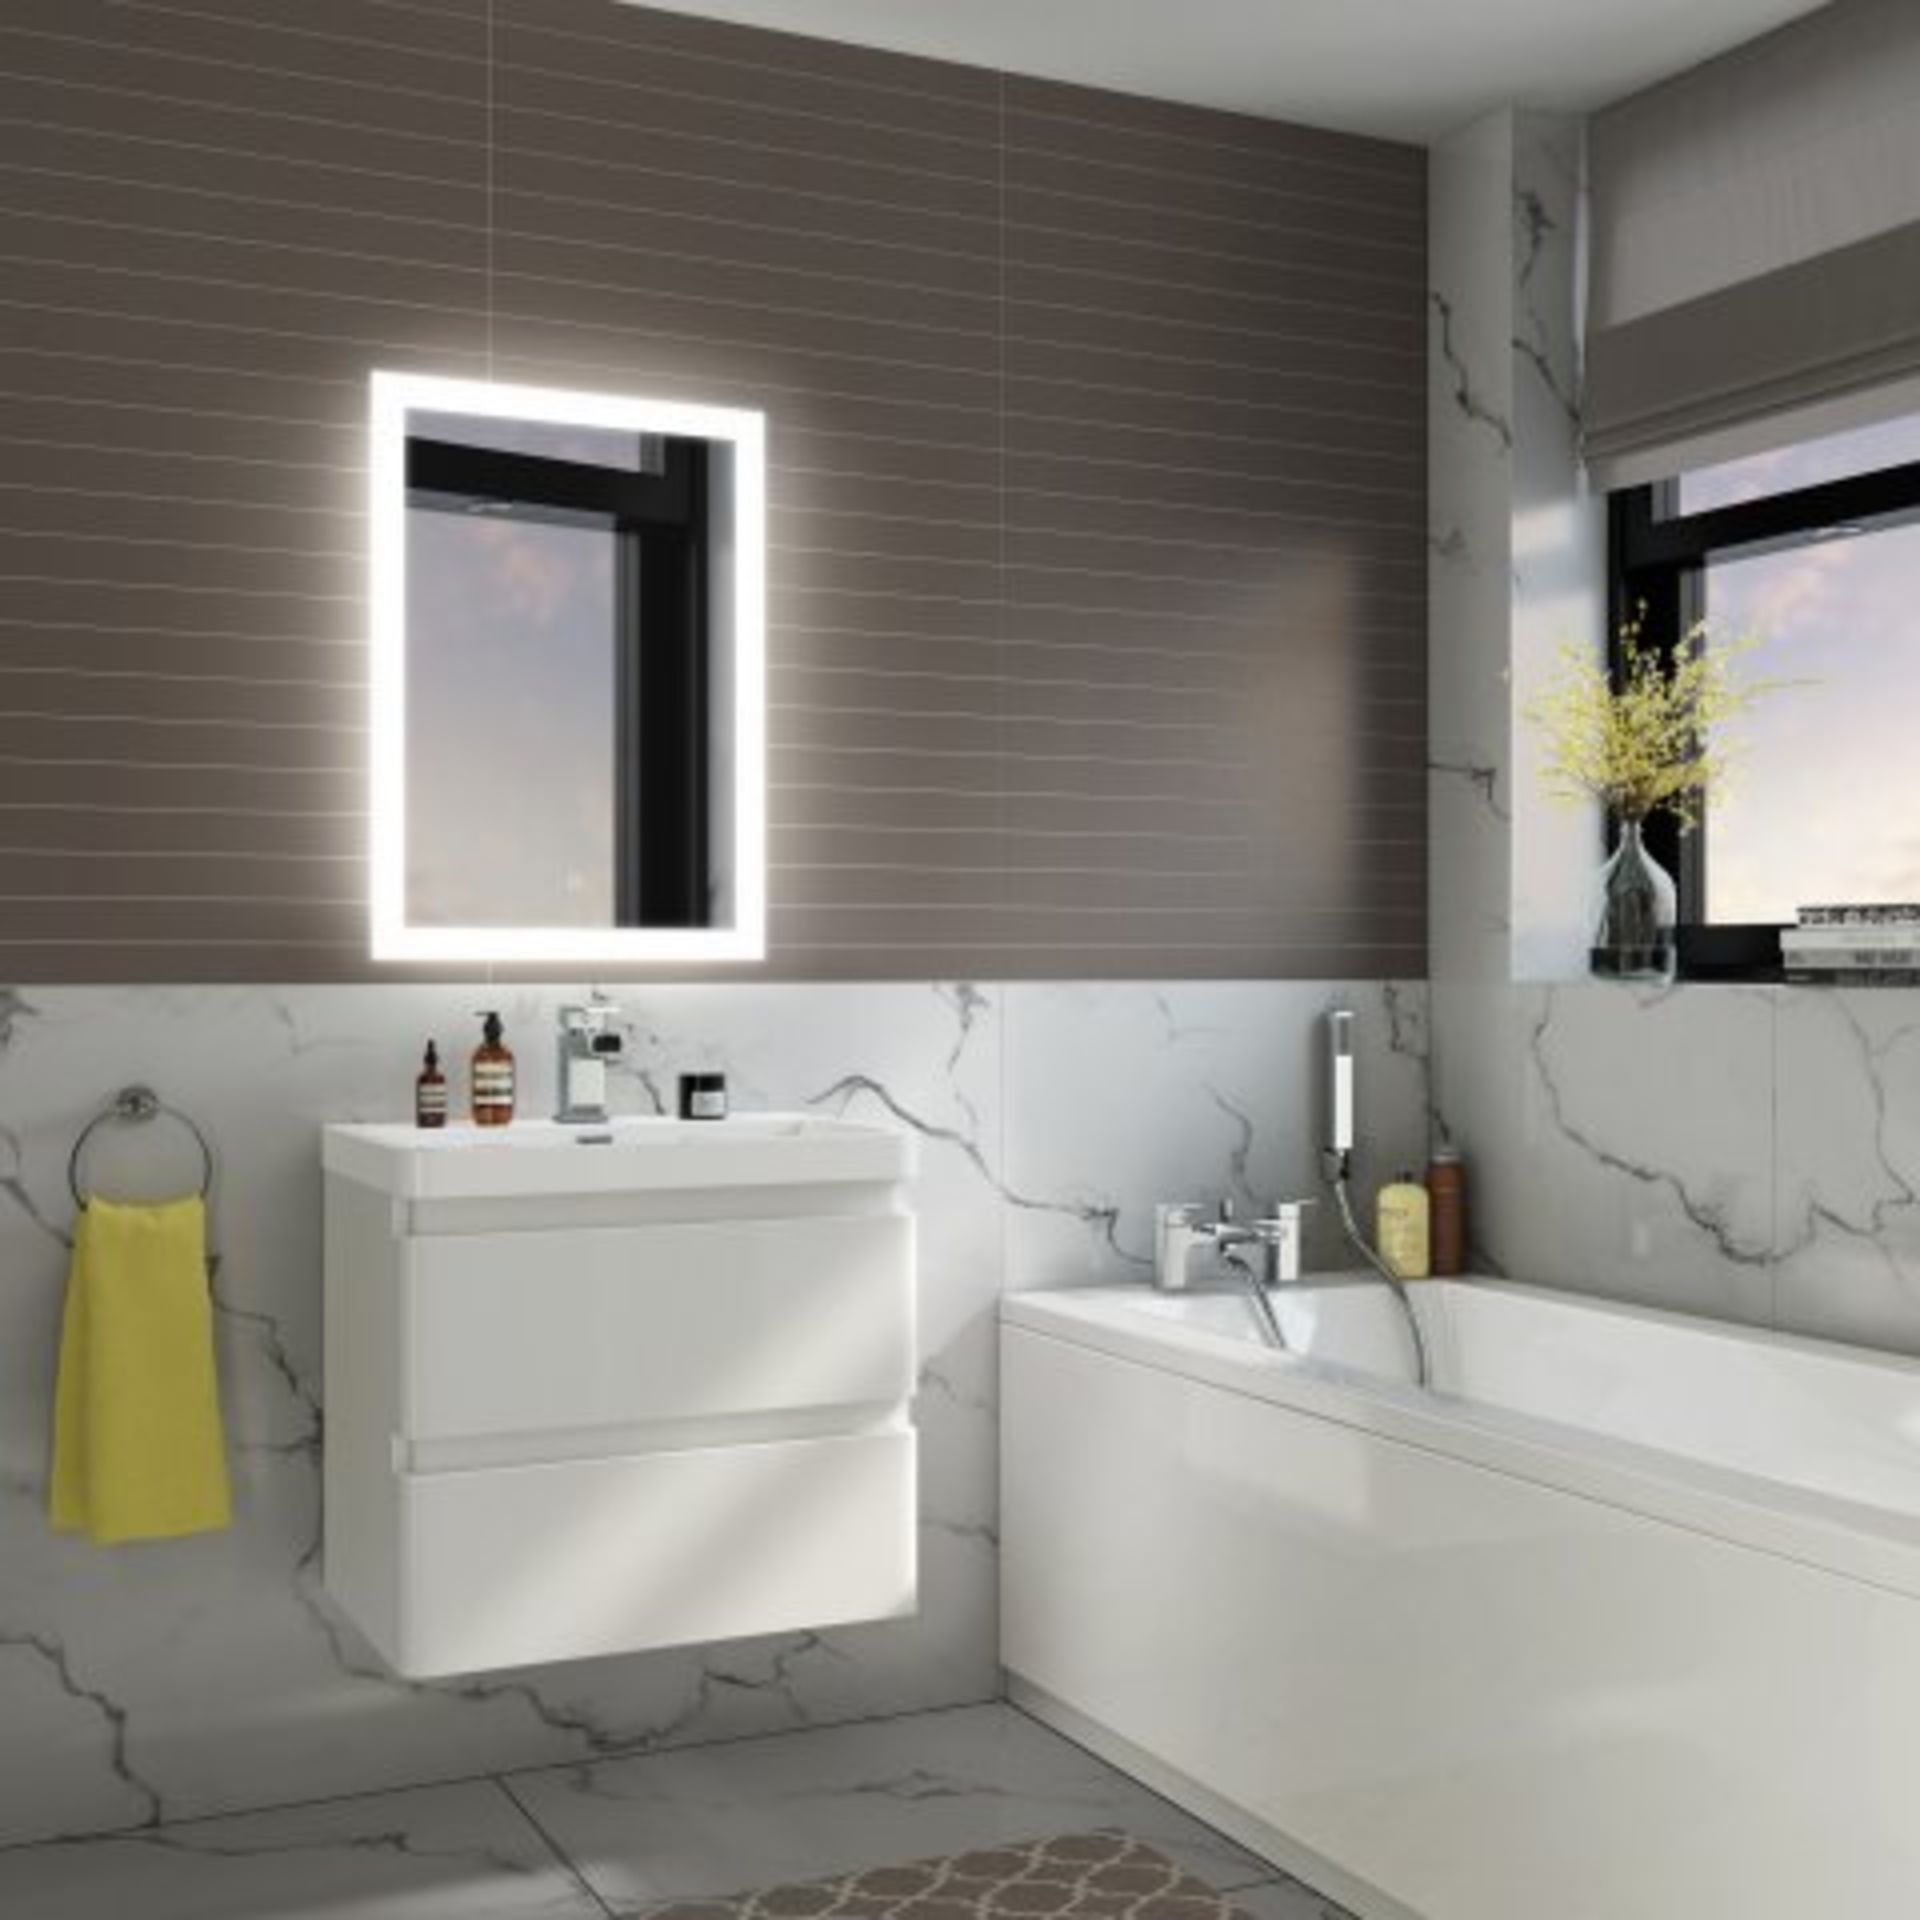 (K80) 700x500mm Orion Illuminated LED Mirror - Switch Control RRP £349.99. Light up your bathroom - Image 2 of 3